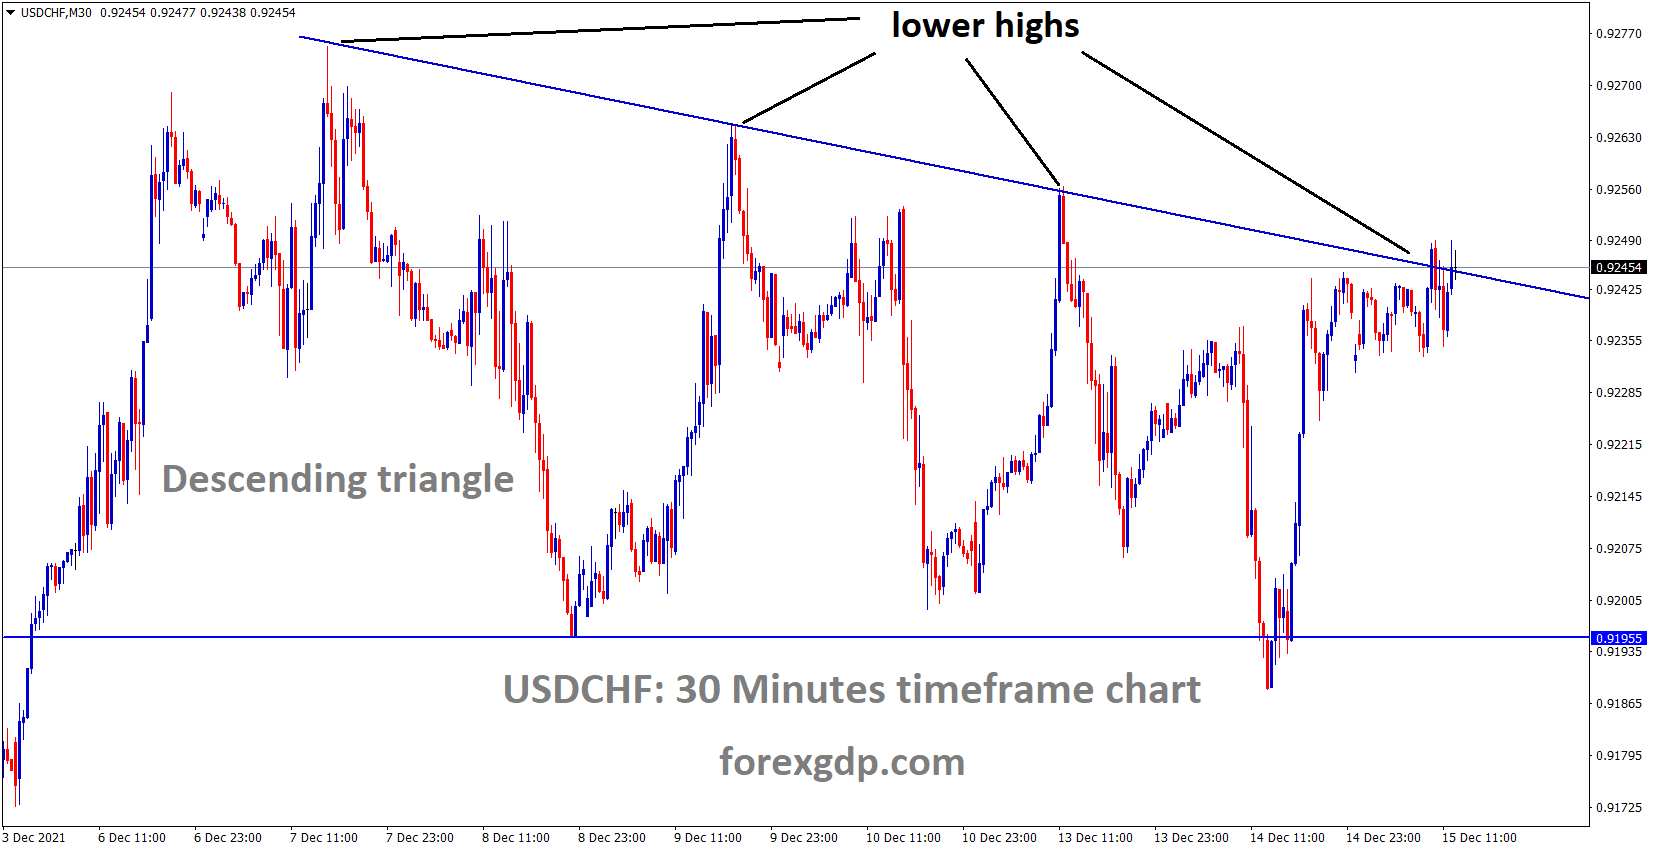 USDCHF is moving in the Descending triangle pattern and the market reached the lower high area of the triangle pattern